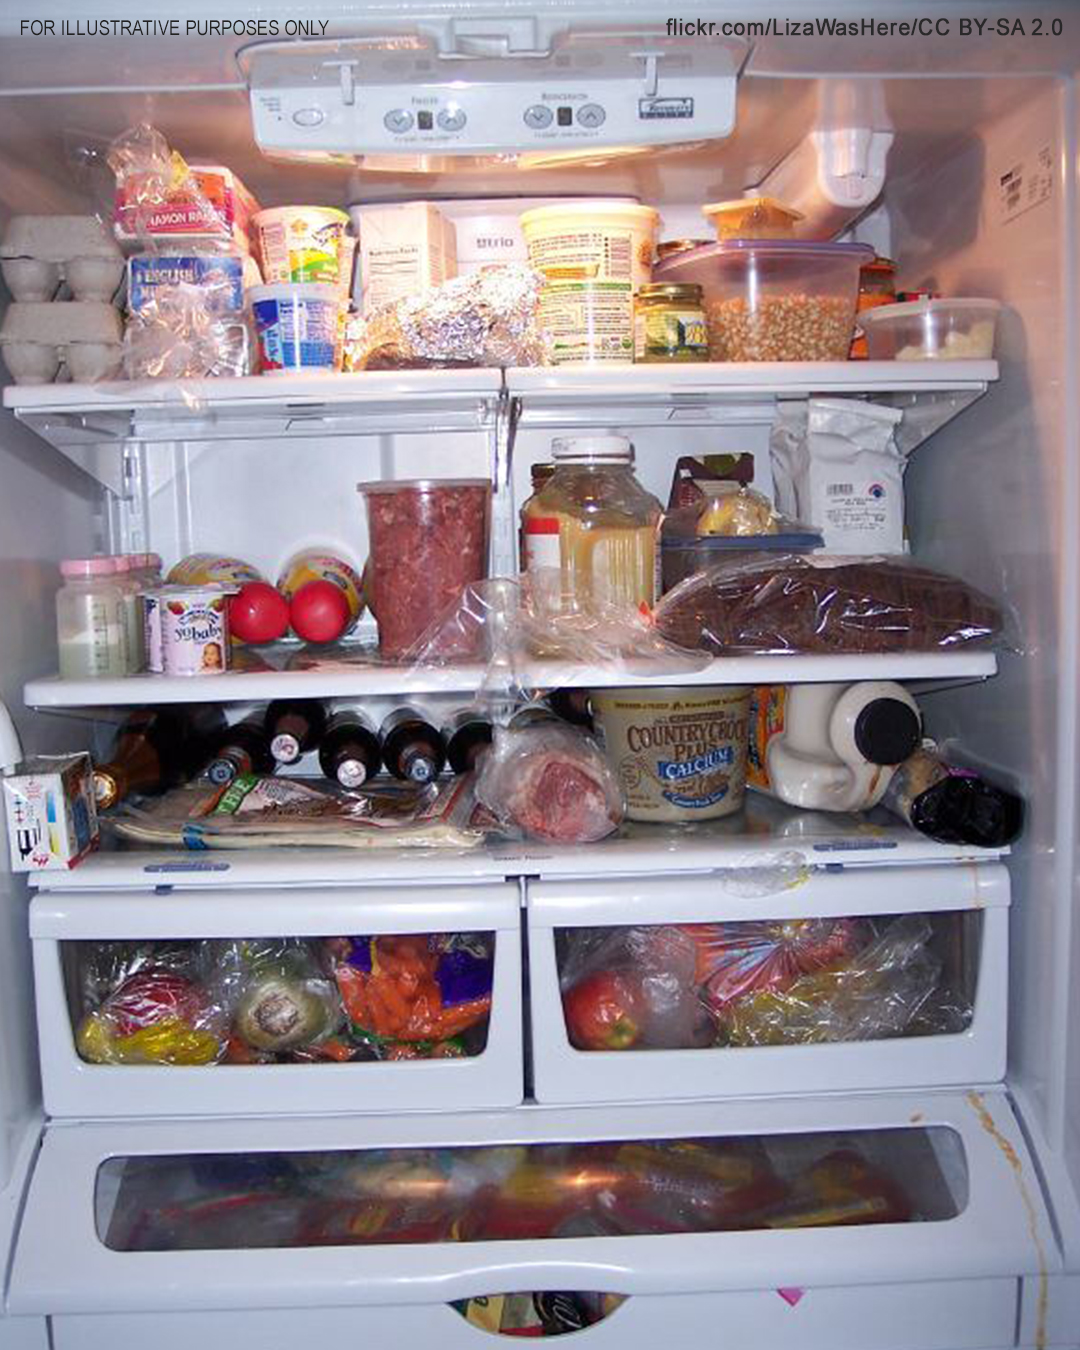 My Husband Filled Our Fridge with Food from Food Banks Again – I Couldn’t Bear It Anymore and Decided to Teach Him a Lesson